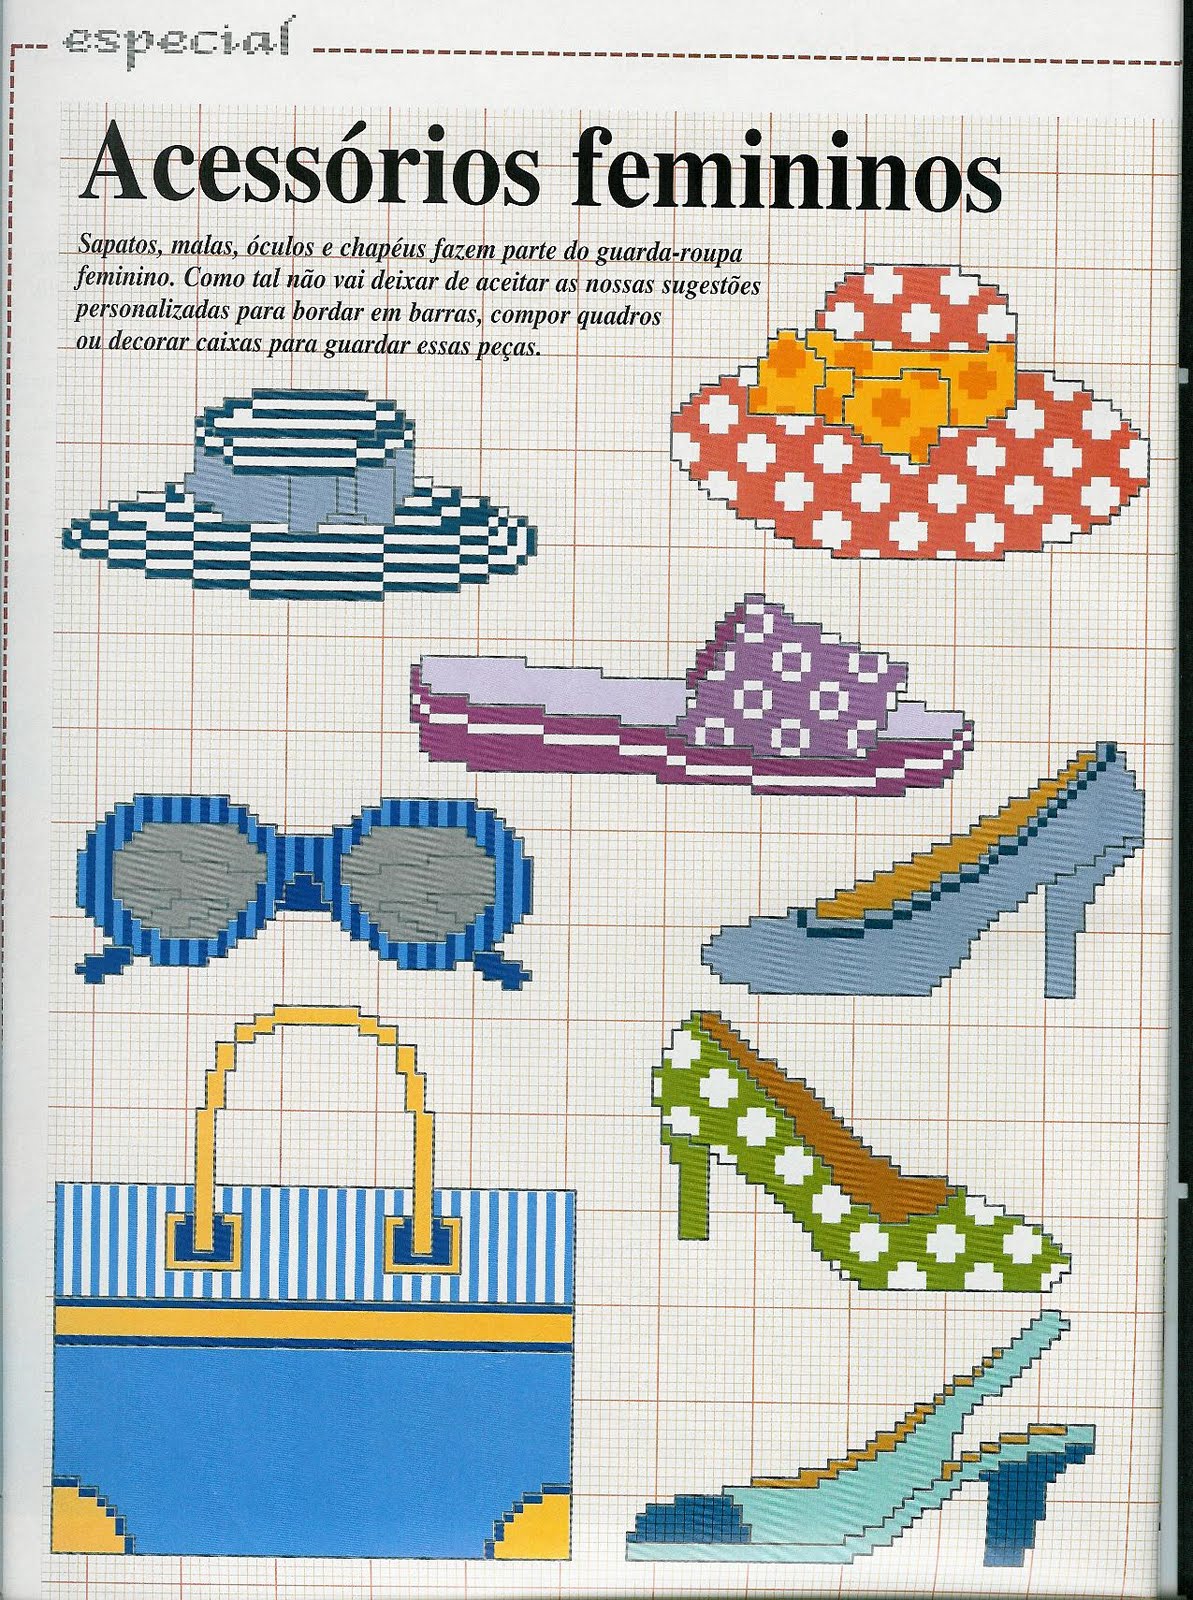 Shoes and accessories free cross stitch pattern (1)